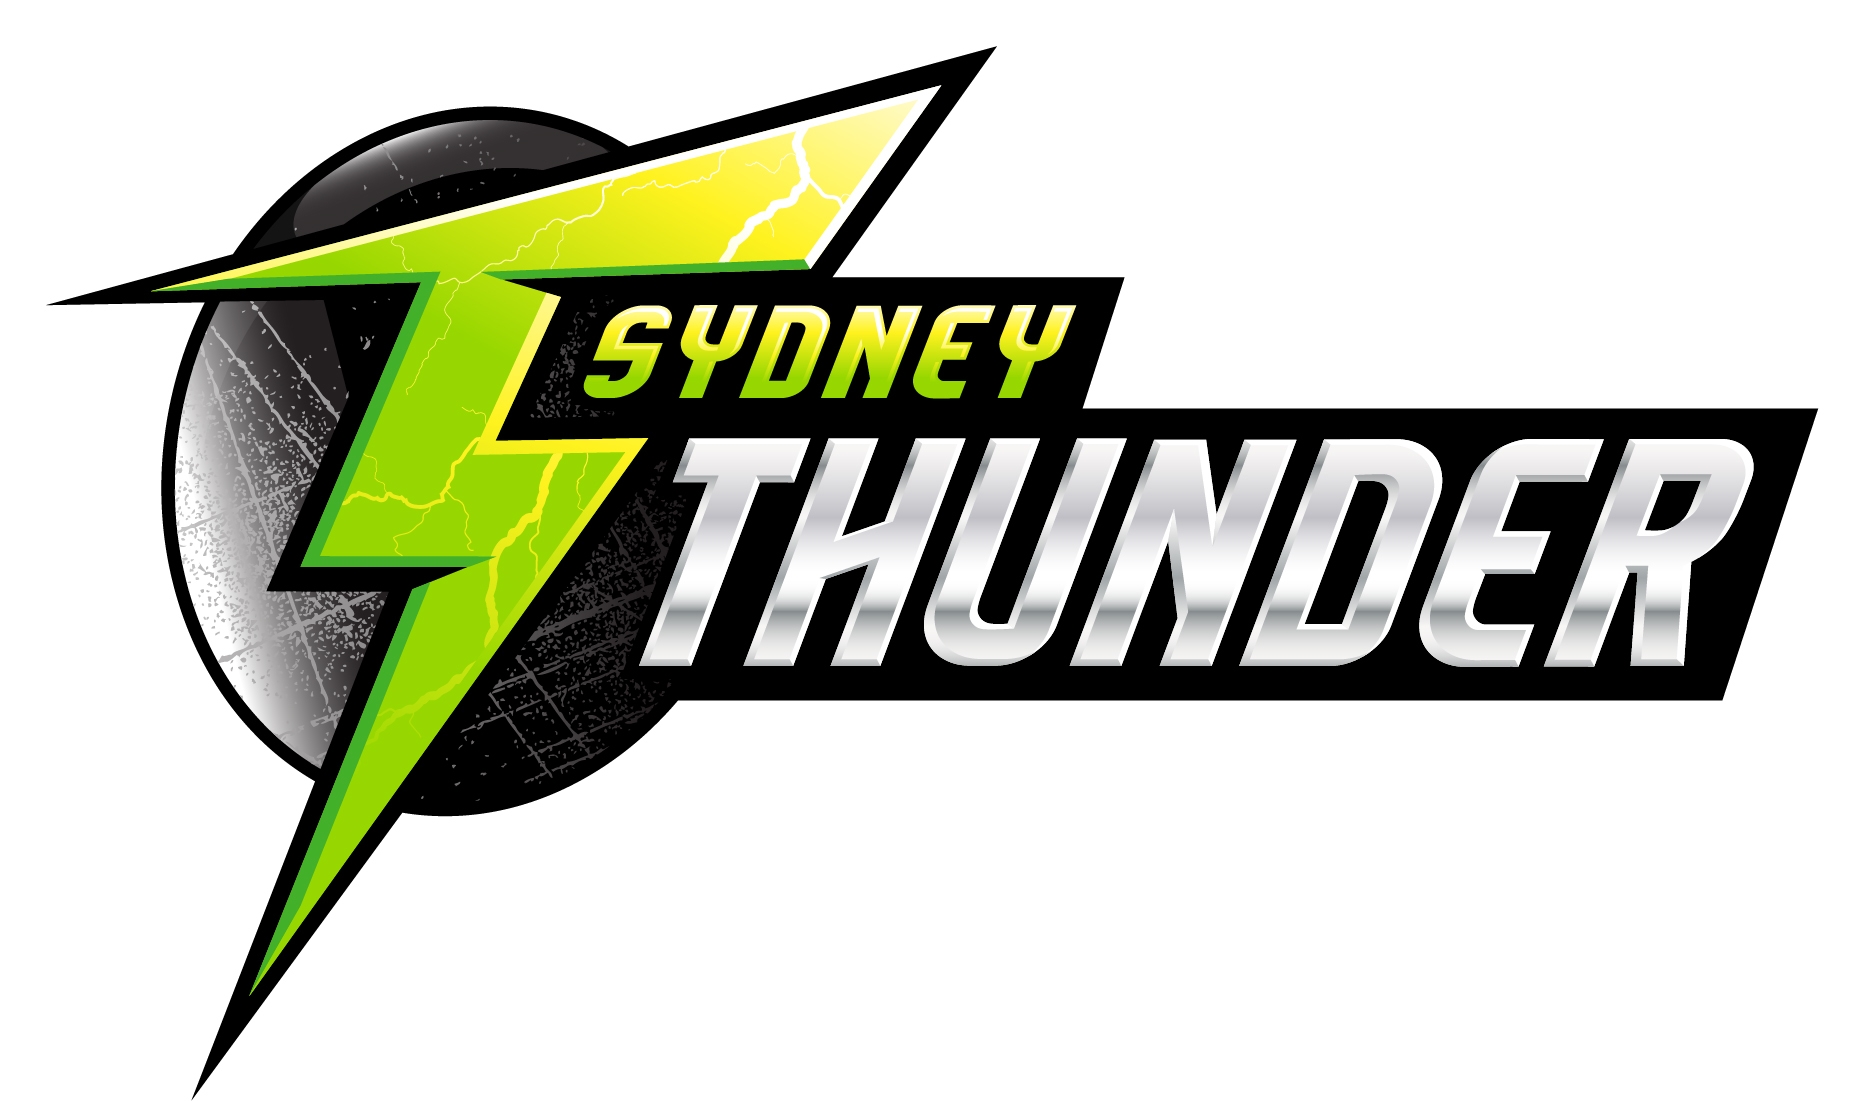 For more information about Sydney Thunder, follow this link